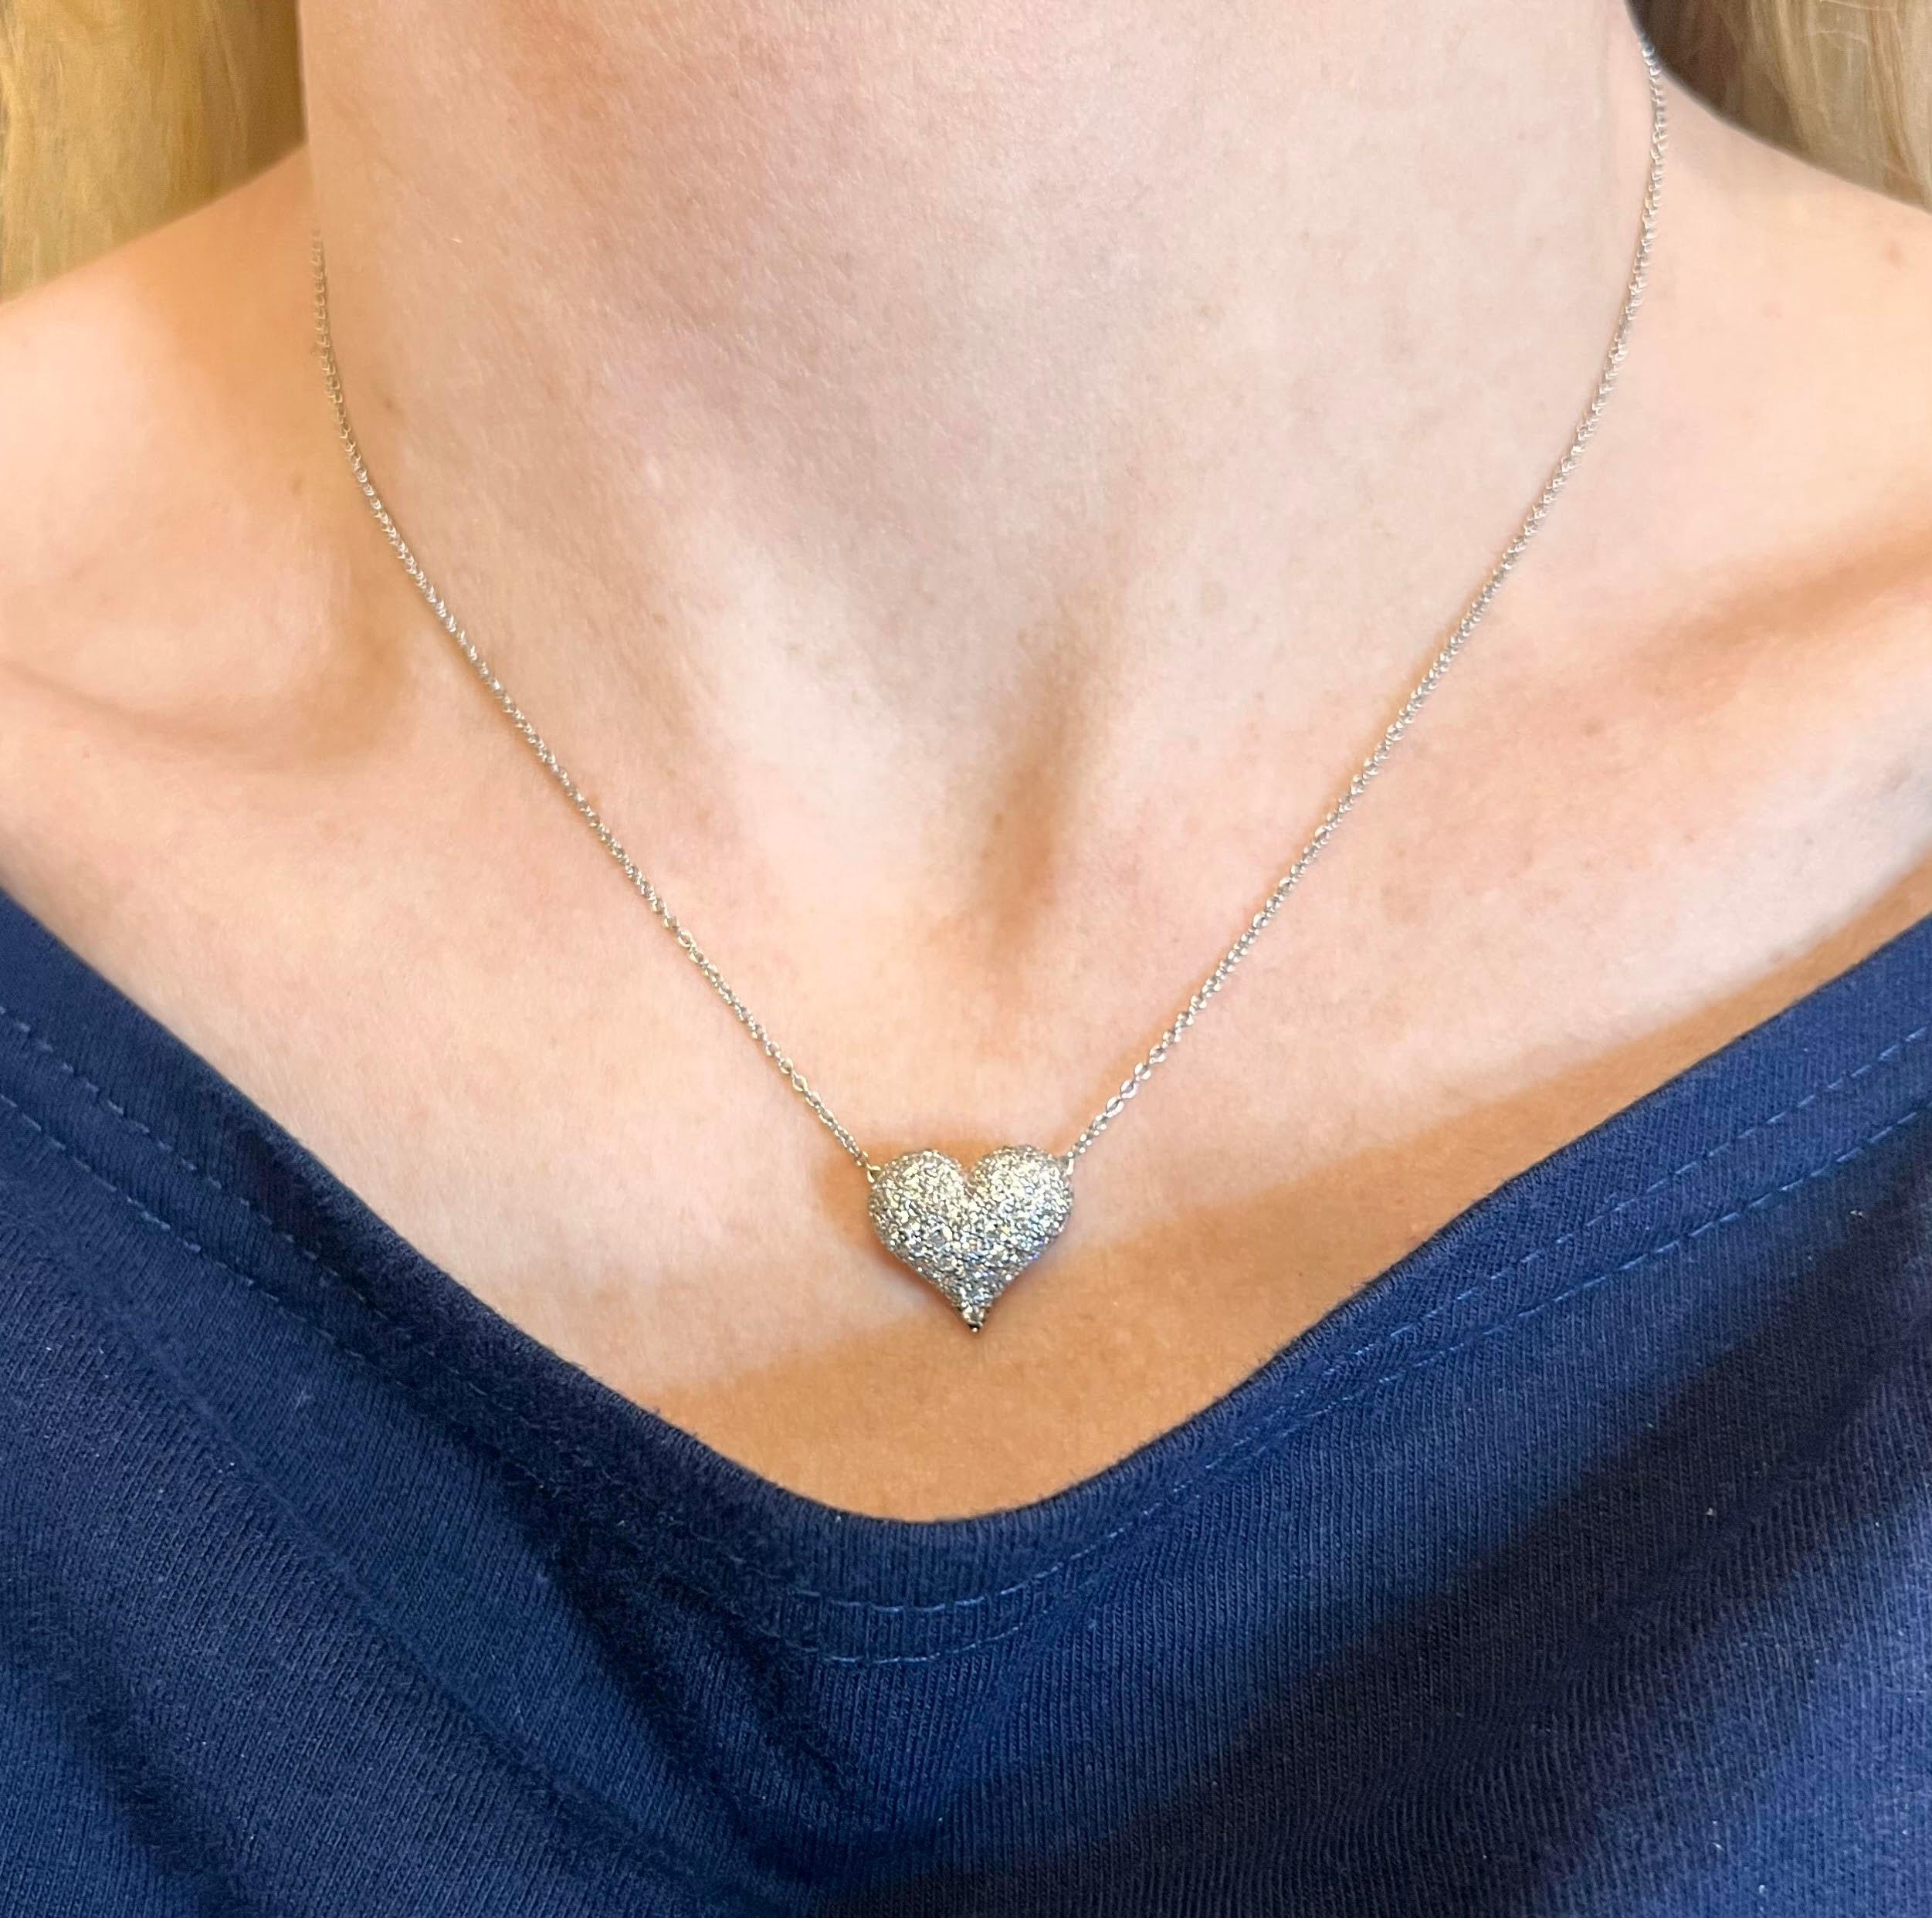 Tiffany & Co. platinum puffed heart pendant pave-set with 63 round brilliant-cut diamonds totaling 1.04 carats (E-F color and VVS-VS clarity).  Delicate curb link neck chain measuring 16.5